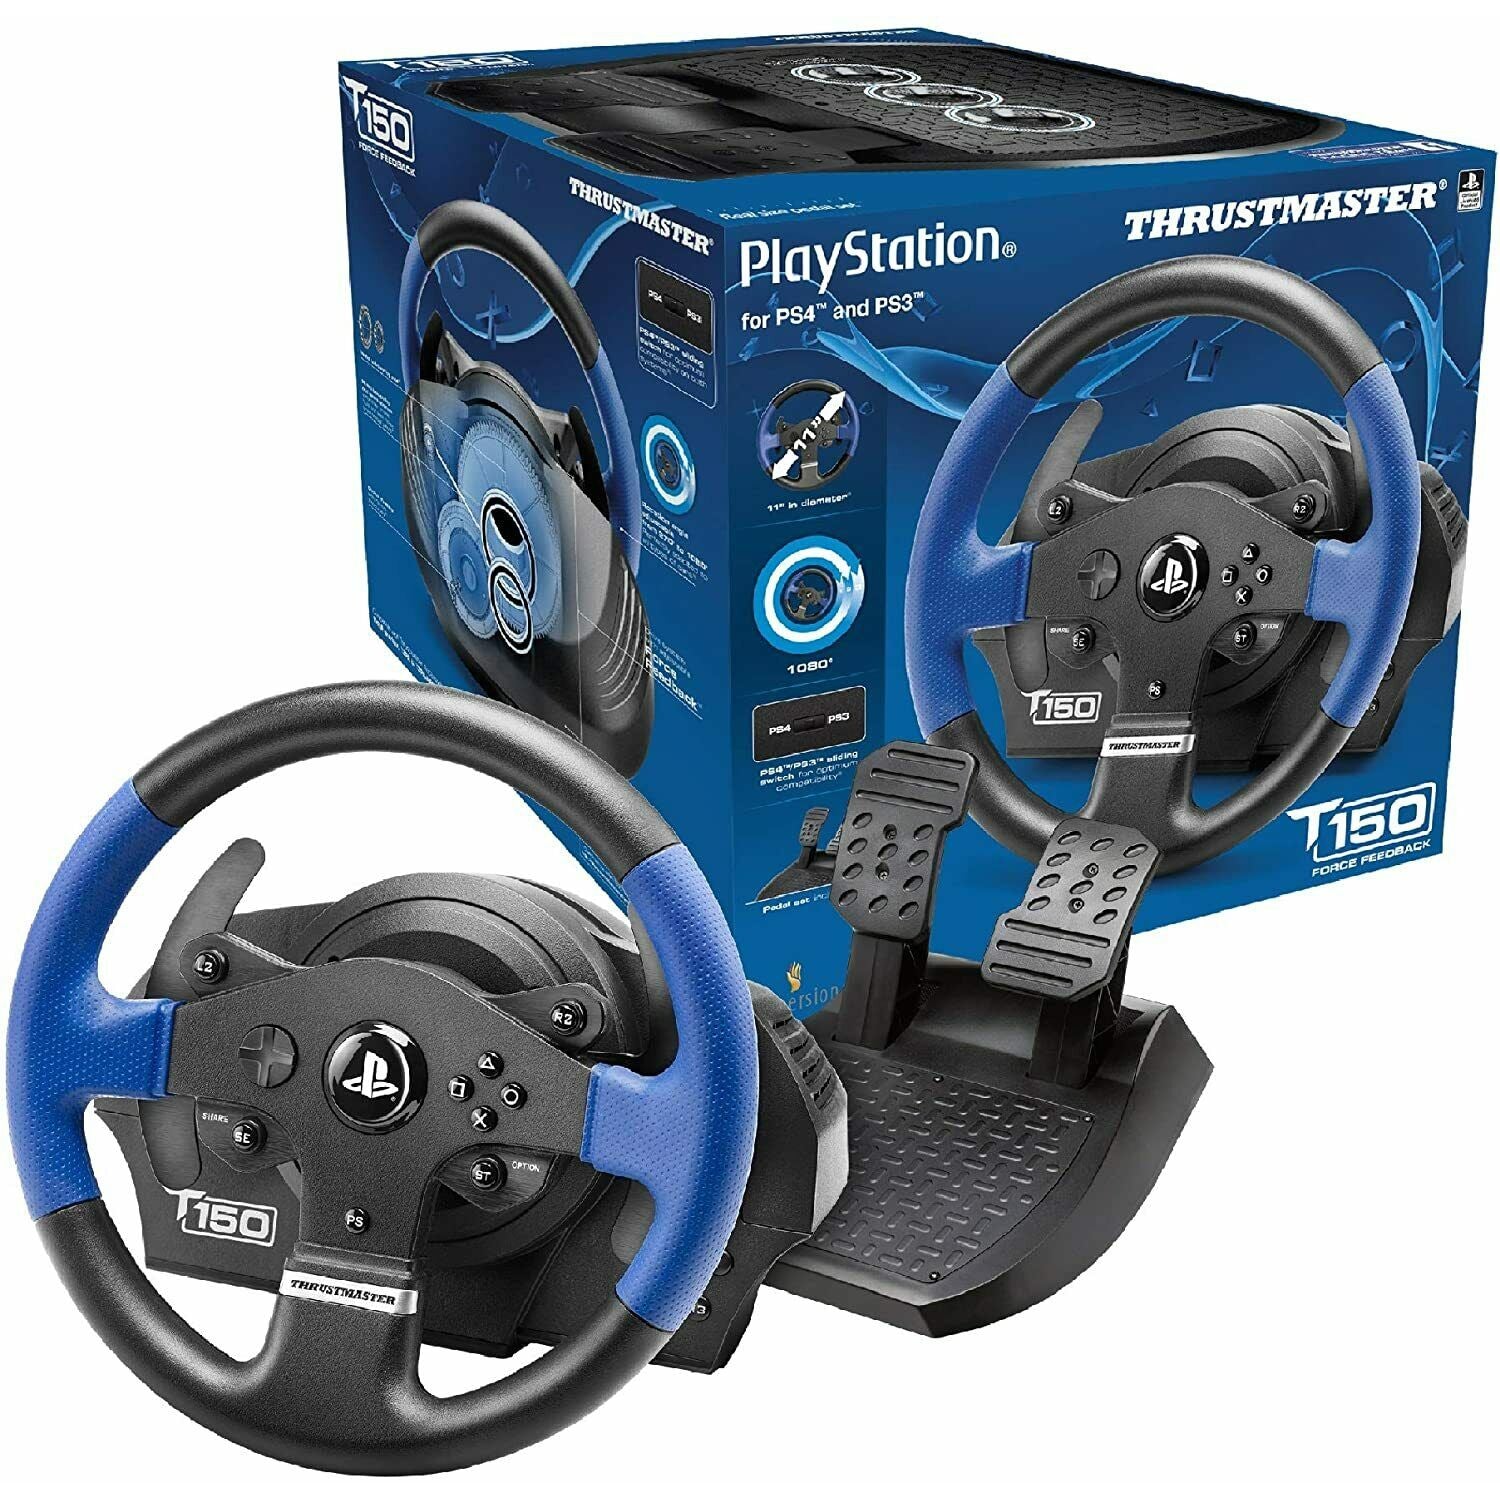 Thrustmaster T150 Force Feedback (PS4 / PS3 / PC) Racing Simulator Wheel Pedals